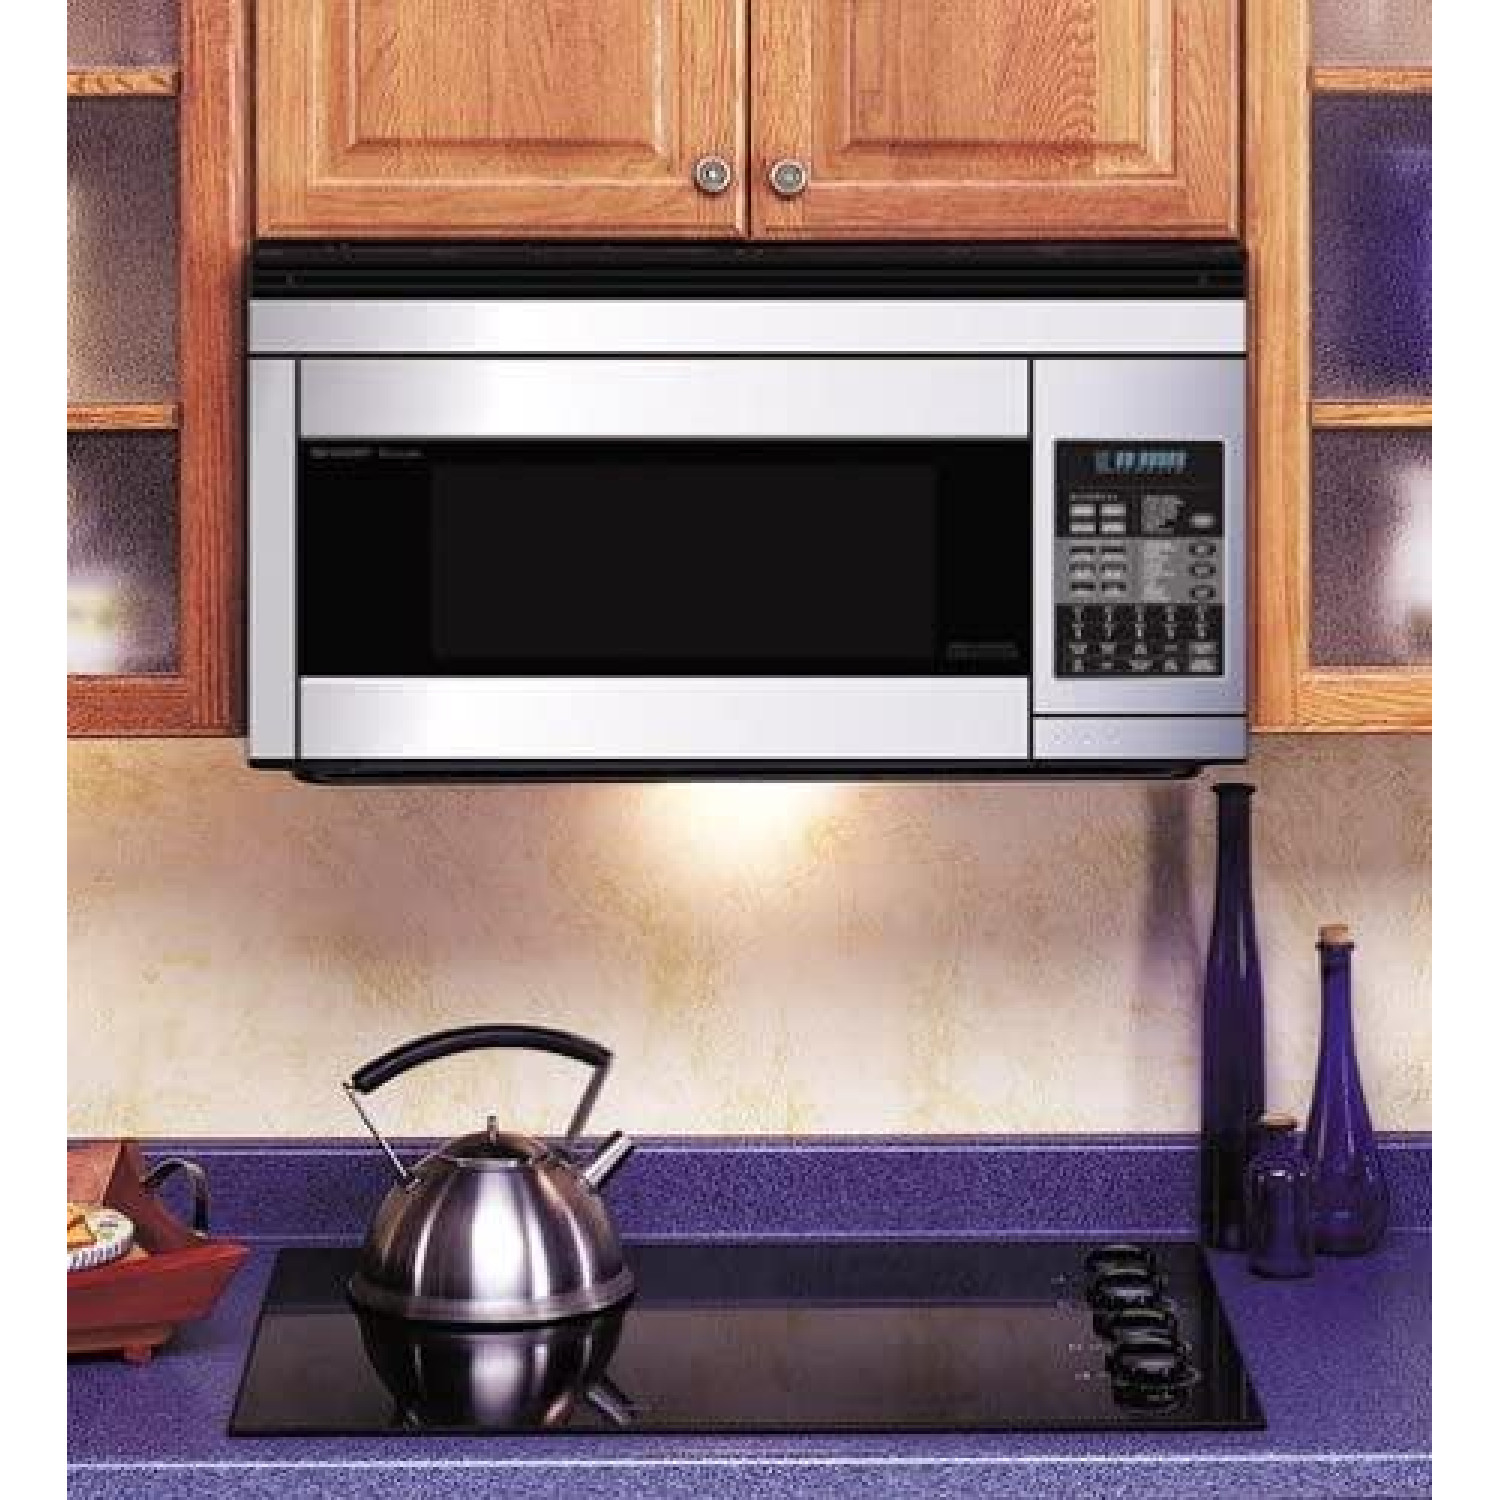 1.1 CF Carousel Over-the-Range Microwave, Convection, 850W - Stainless